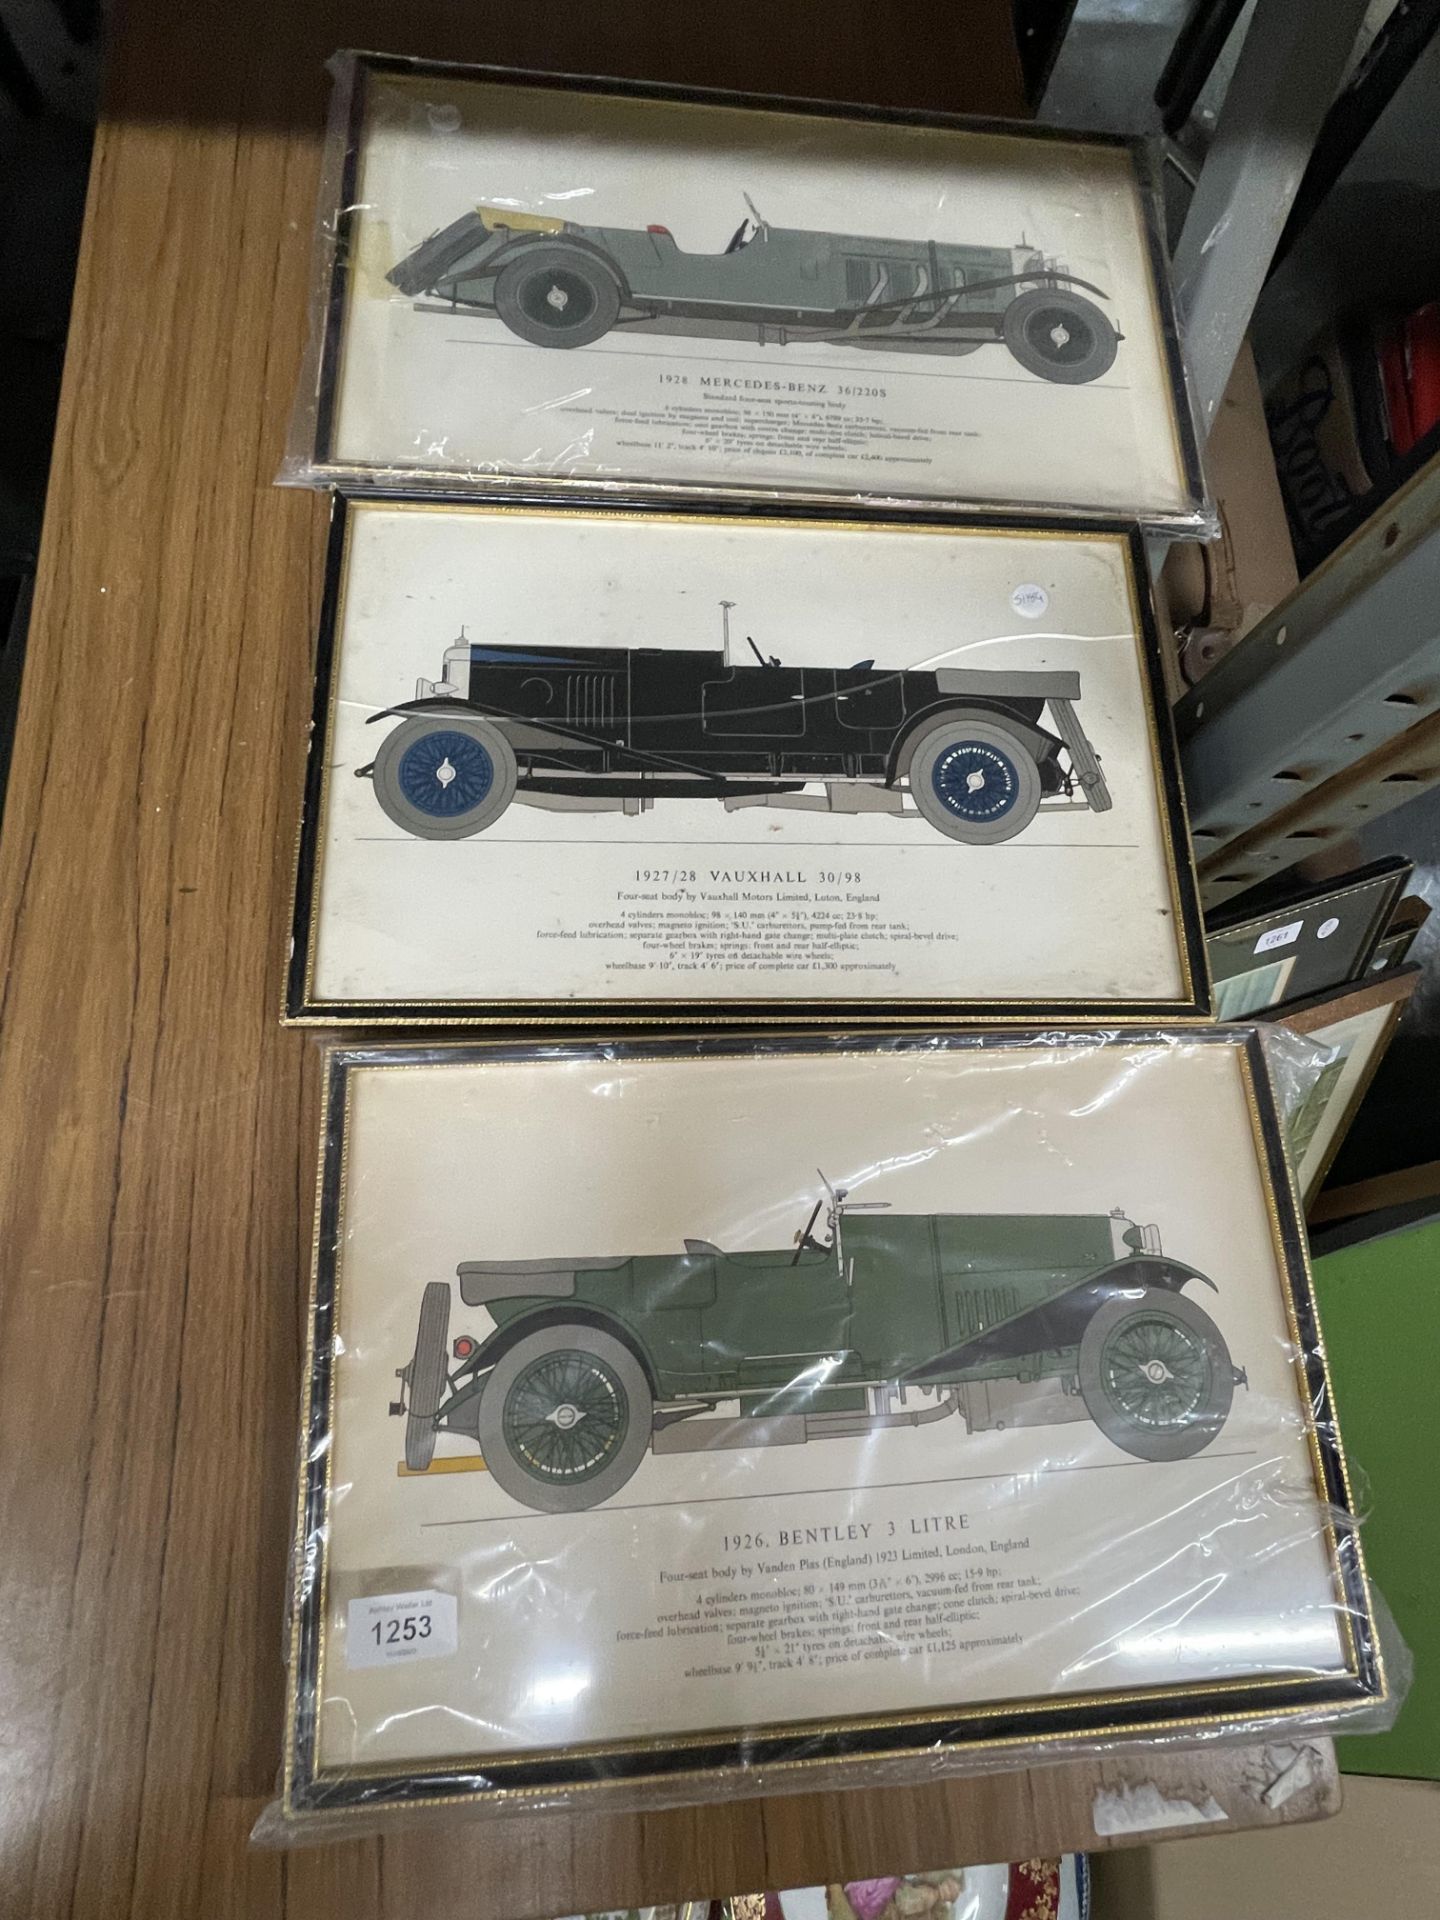 THREE FRAMED PRINTS OF VINTAGE CARS - 1926 BENTLEY 3 LITRE', 1927/28 VAUXHALL 30/98' AND '1928